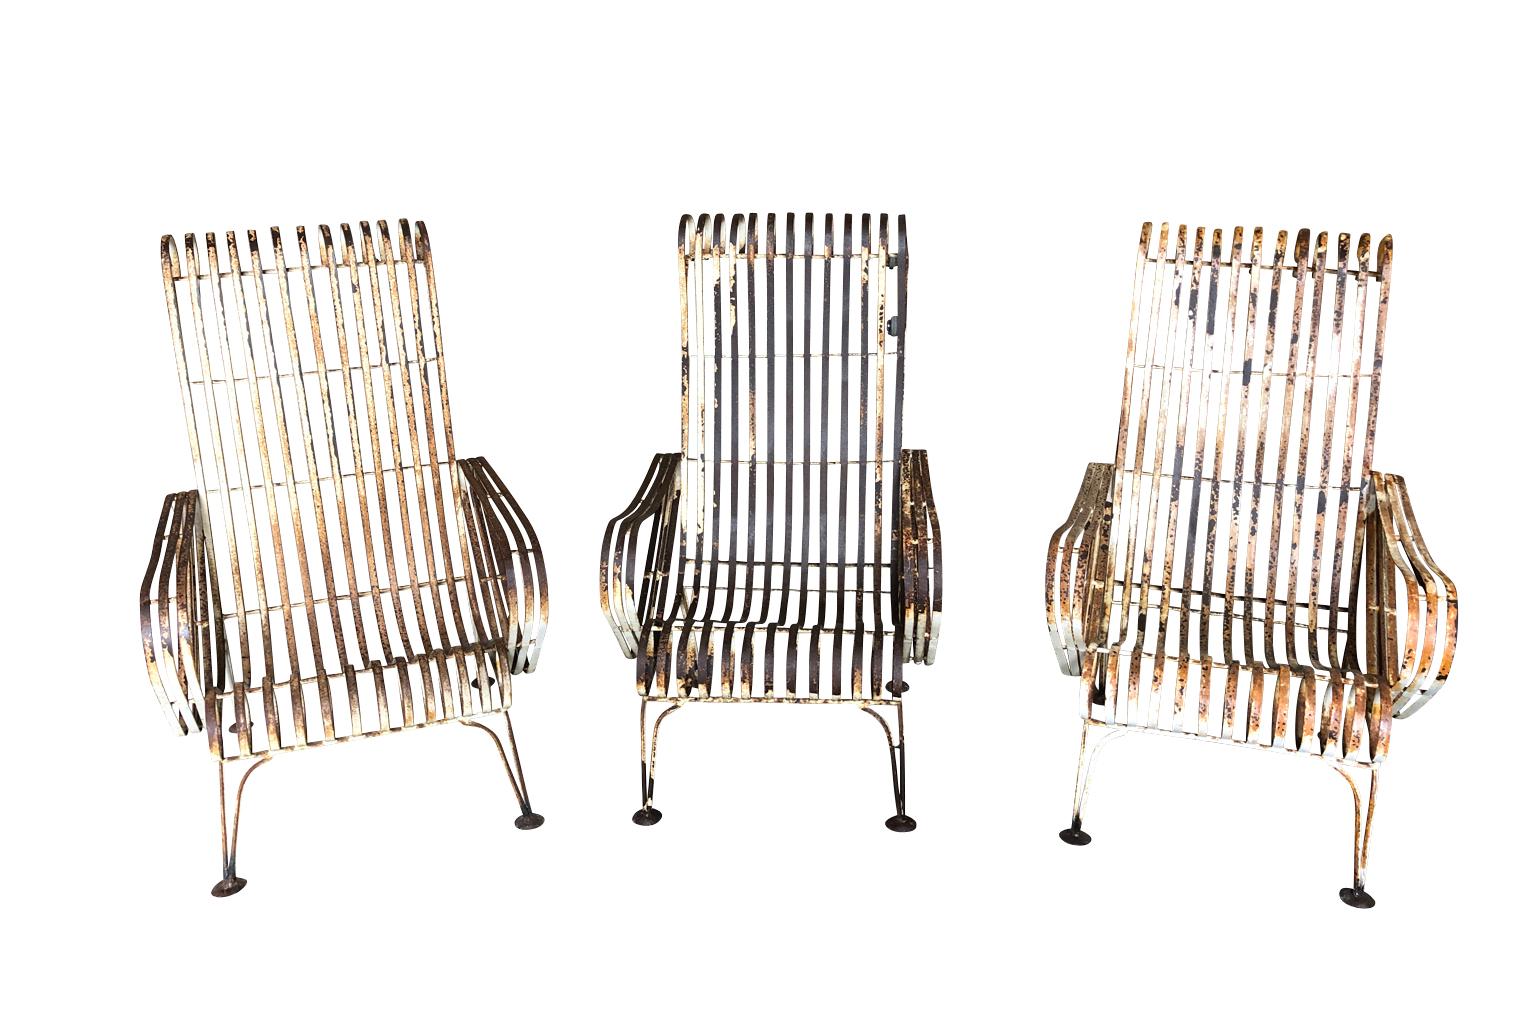 A terrific set of 3 mid-20th century garden armchairs from the Provence region of France. Sturdily constructed from painted iron with a wonderful patina. Very comfortable. A wonderful addition to any garden, solarium or porch.